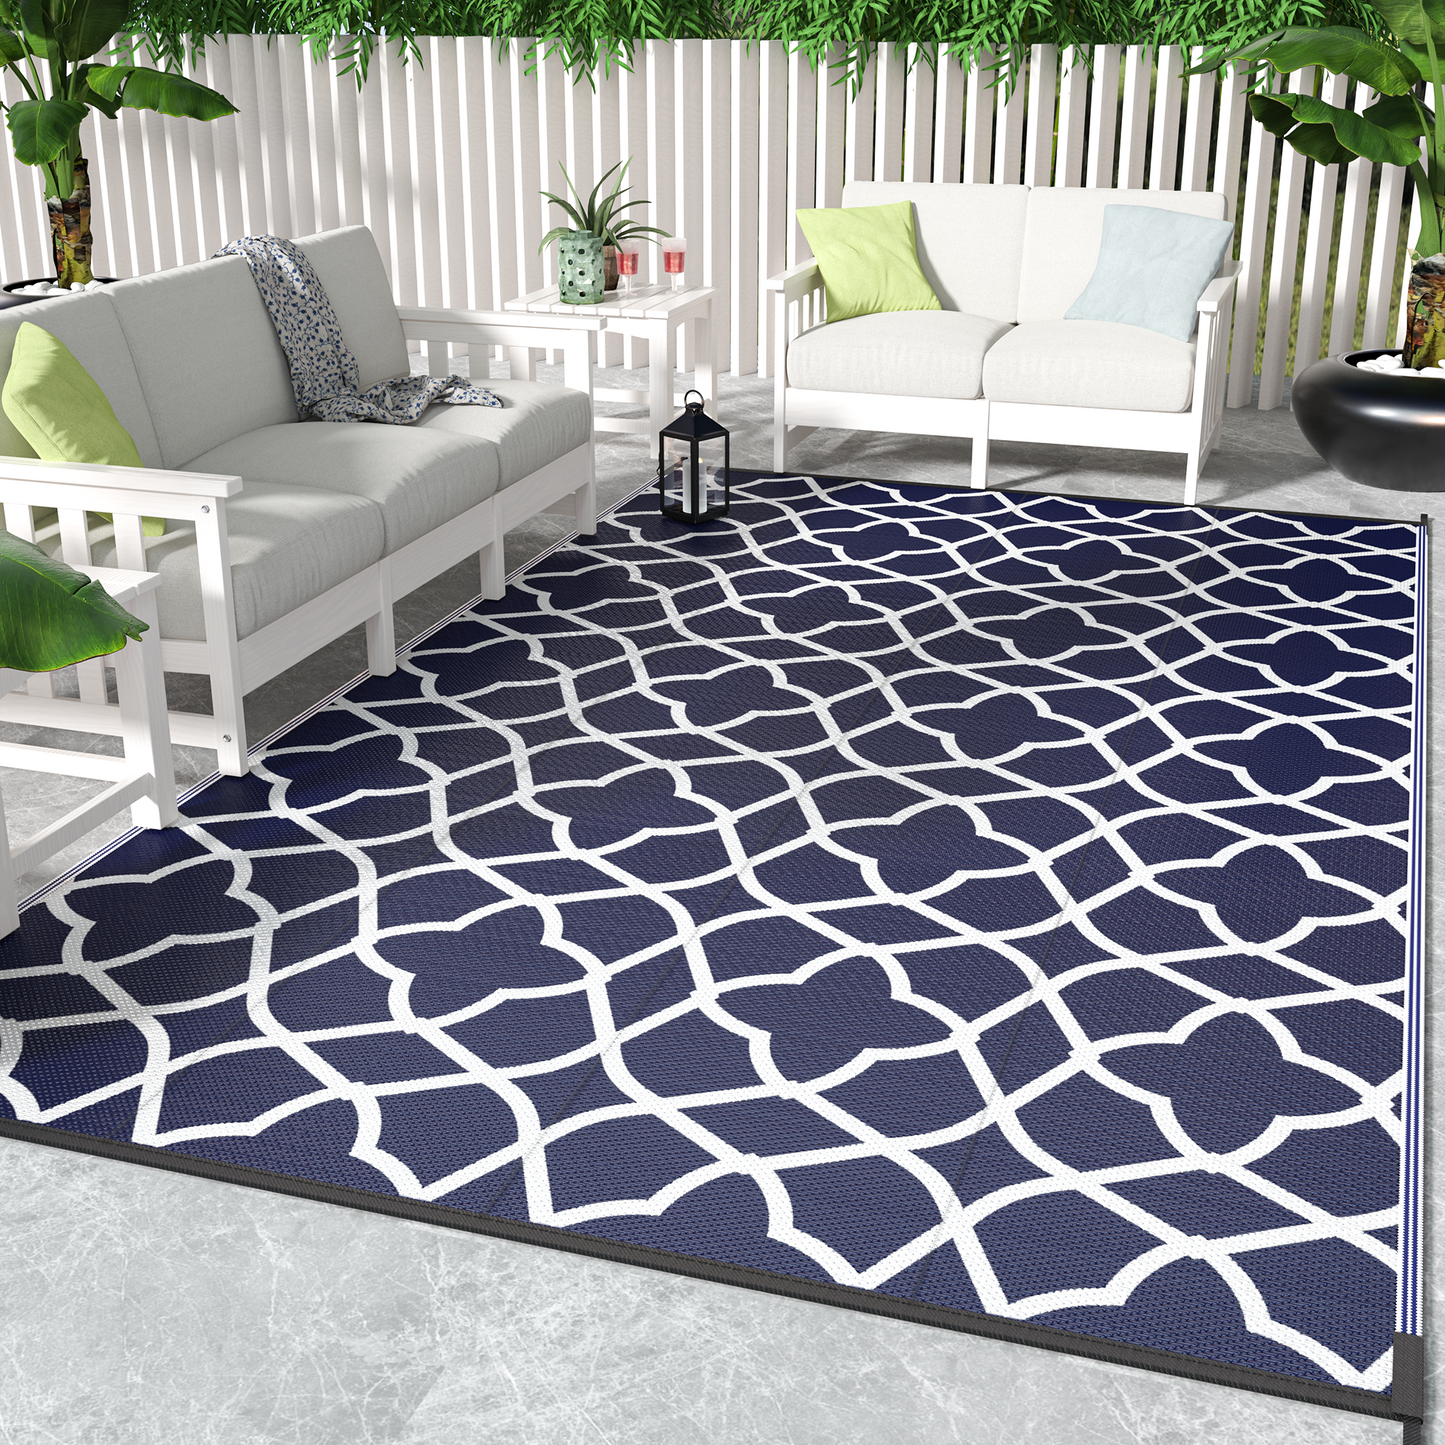 GENIMO Outdoor Patio Rugs Waterproof, Reversible Plastic Straw Rug for Patios Clearance, Outside Area Carpet, Camping Mat for Outdoor Decor, RV, Deck, Porch, Picnic, Camper